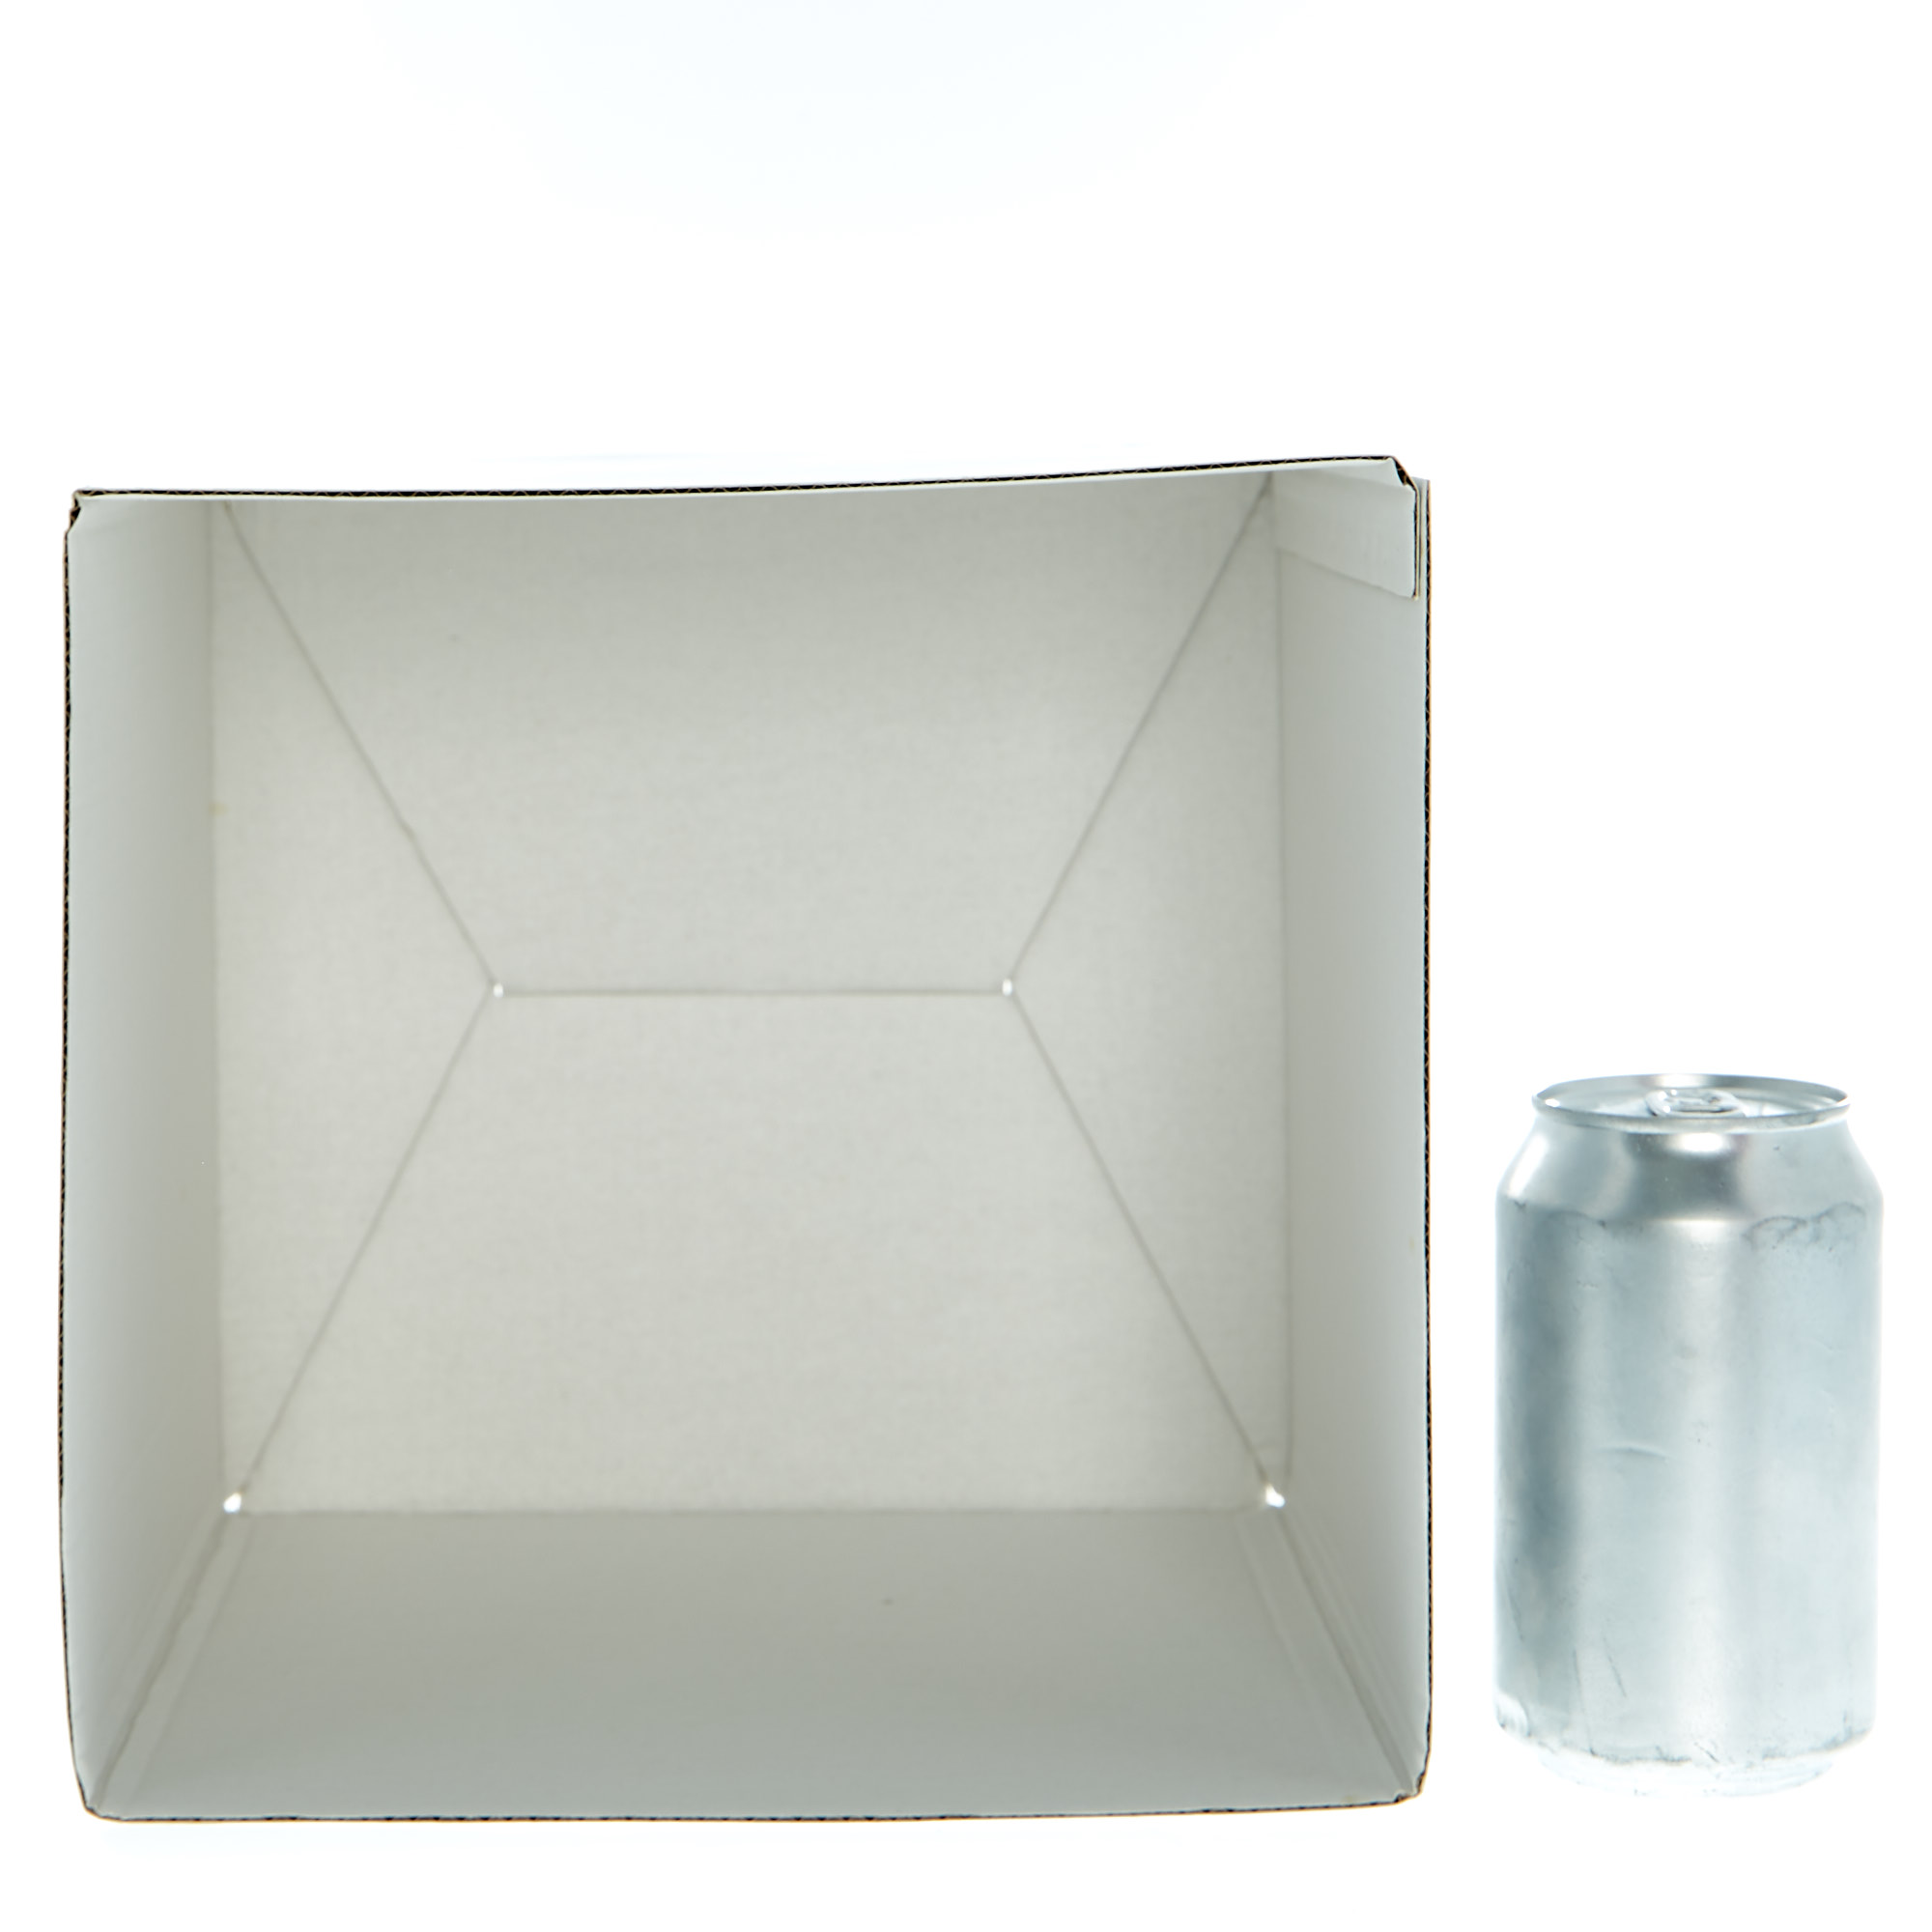 Buy Large Silver & White Flat-Pack Christmas Gift Box for GBP 1.49